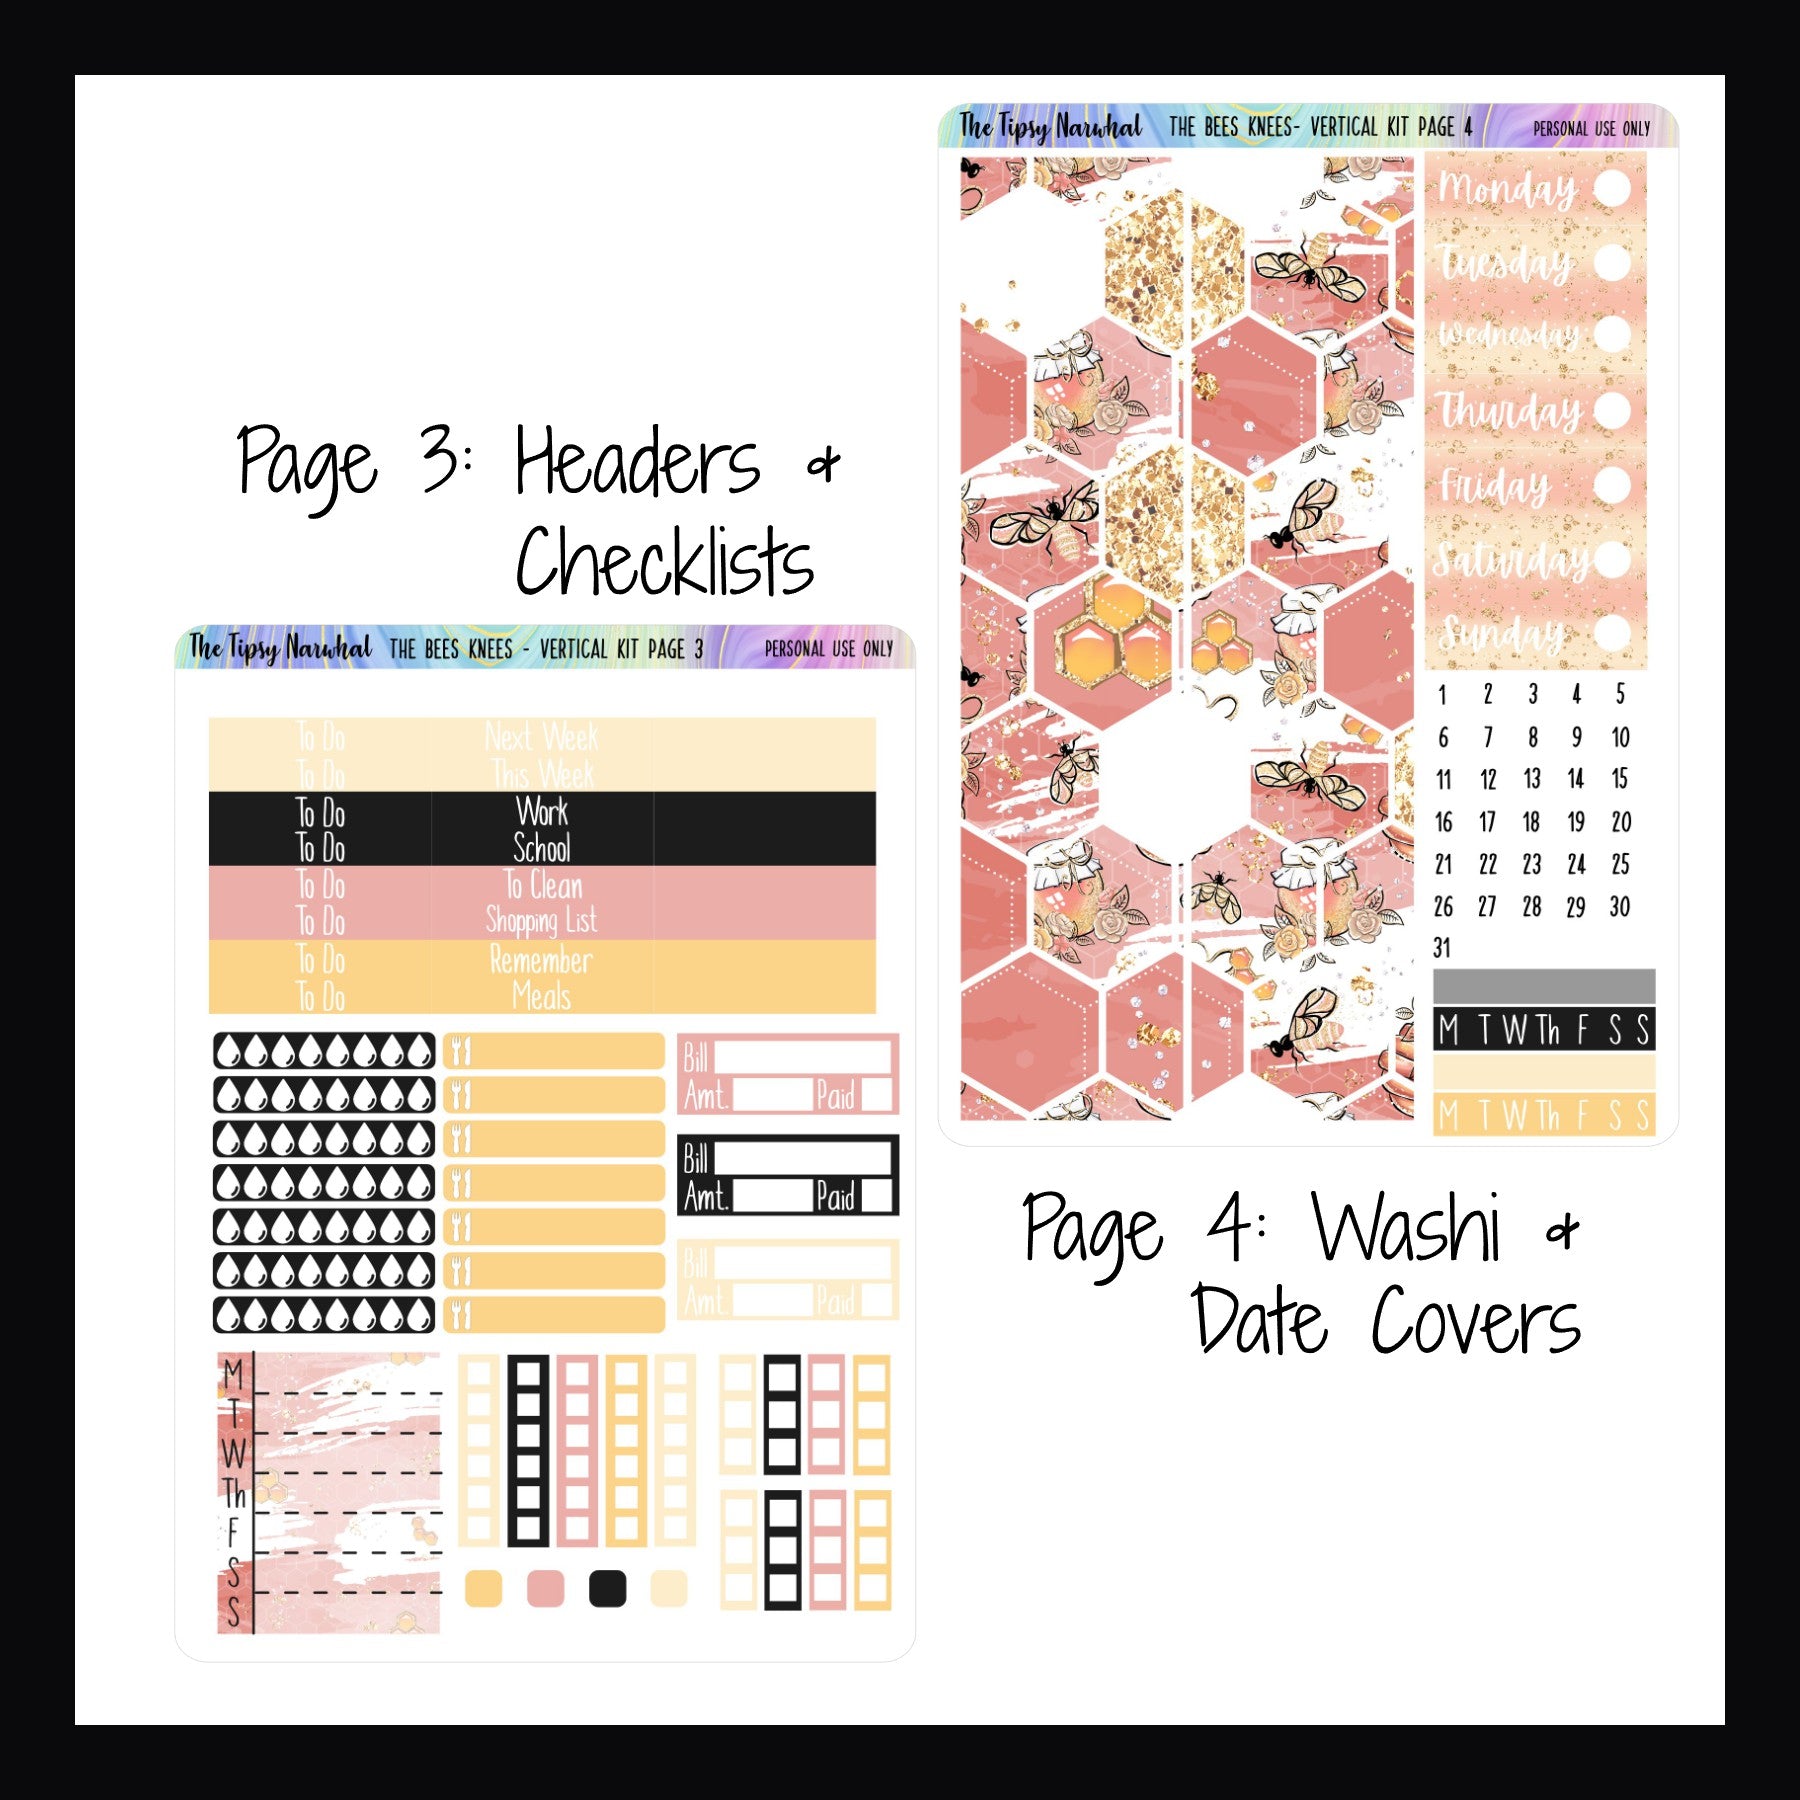 Digital The Bees Knees Vertical Kit Pages 3 and 4.  Page 3 features headers, checklist stickers and stickers for meal, water intake and bill tracking.  Page 4 features full sized washi, date covers and habit trackers.